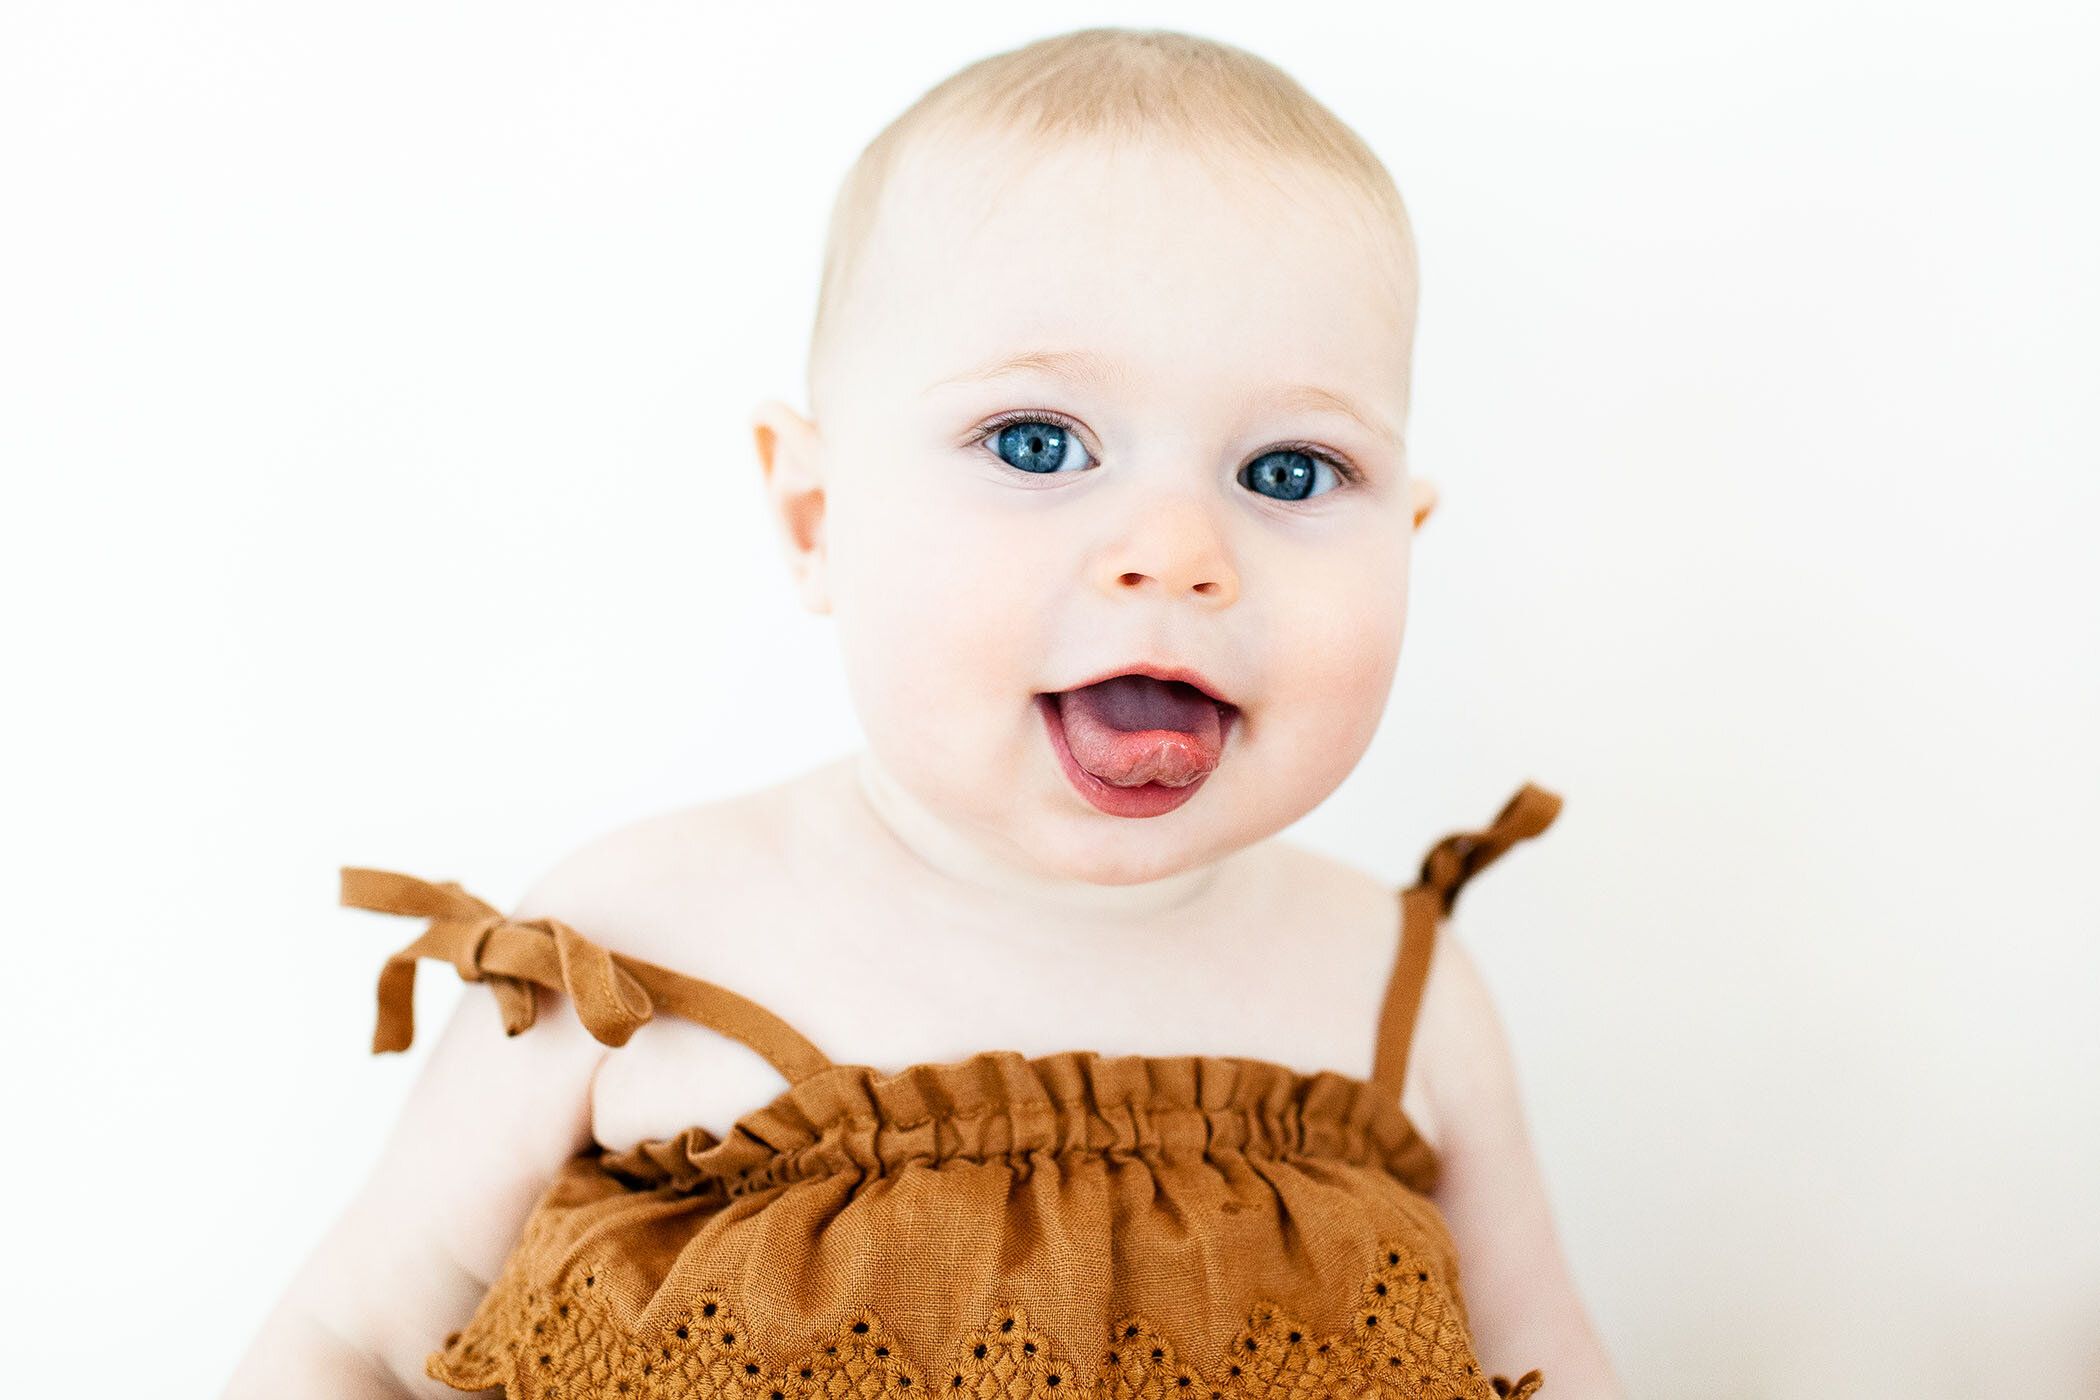 fletcher-and-co-tucson-portrait-studio-session-with-baby-girl_rothschild 025.jpg